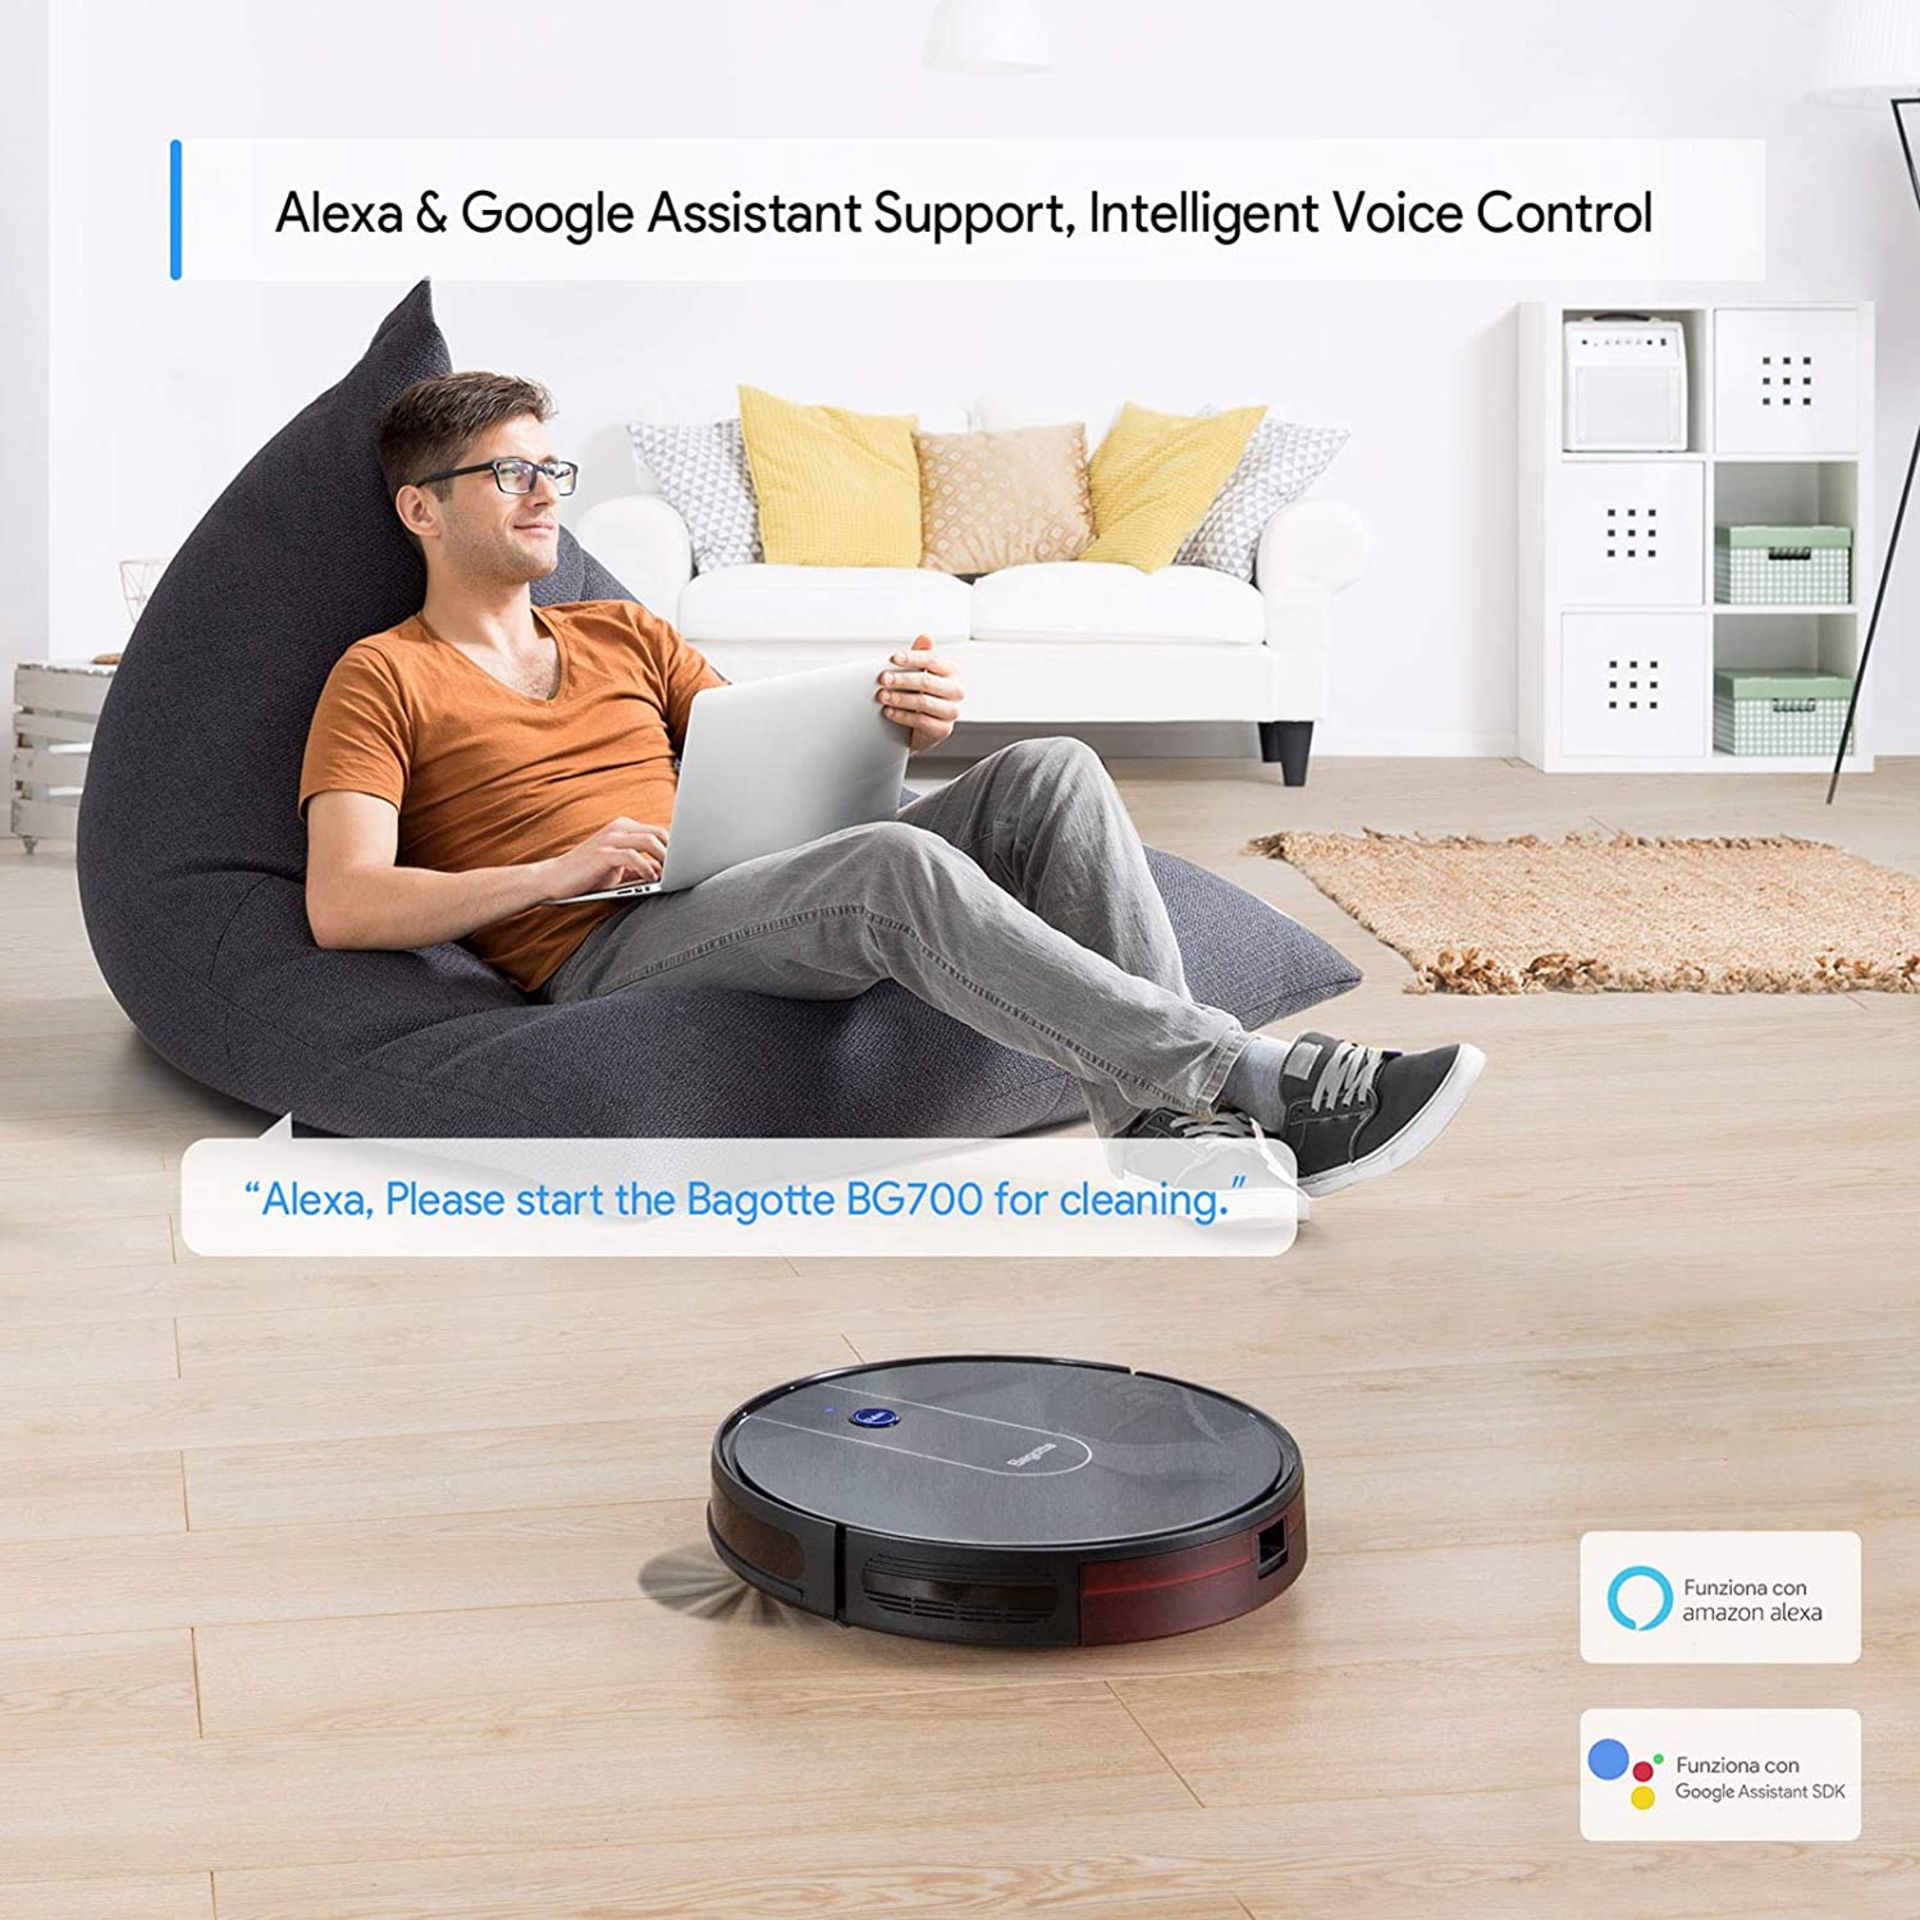 Bagotte BG700 Wi-Fi Robot Vacuum with mop - 2.7" Thin, Strong Suction, Work with Alexa - Bild 7 aus 8